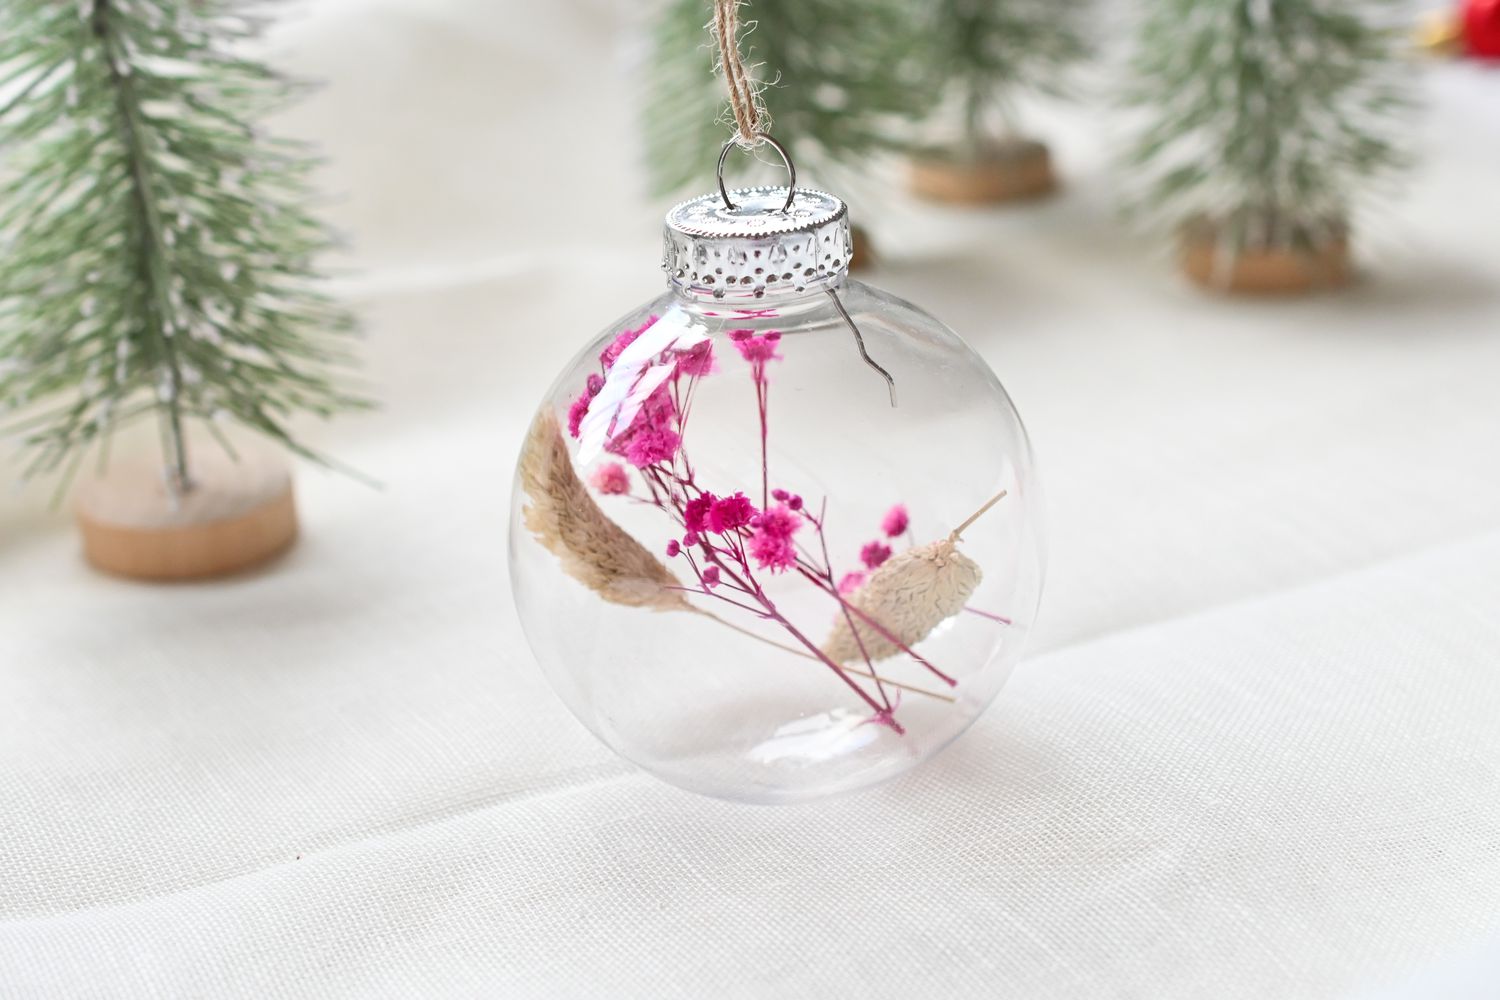 How To Decorate Glass Ornaments